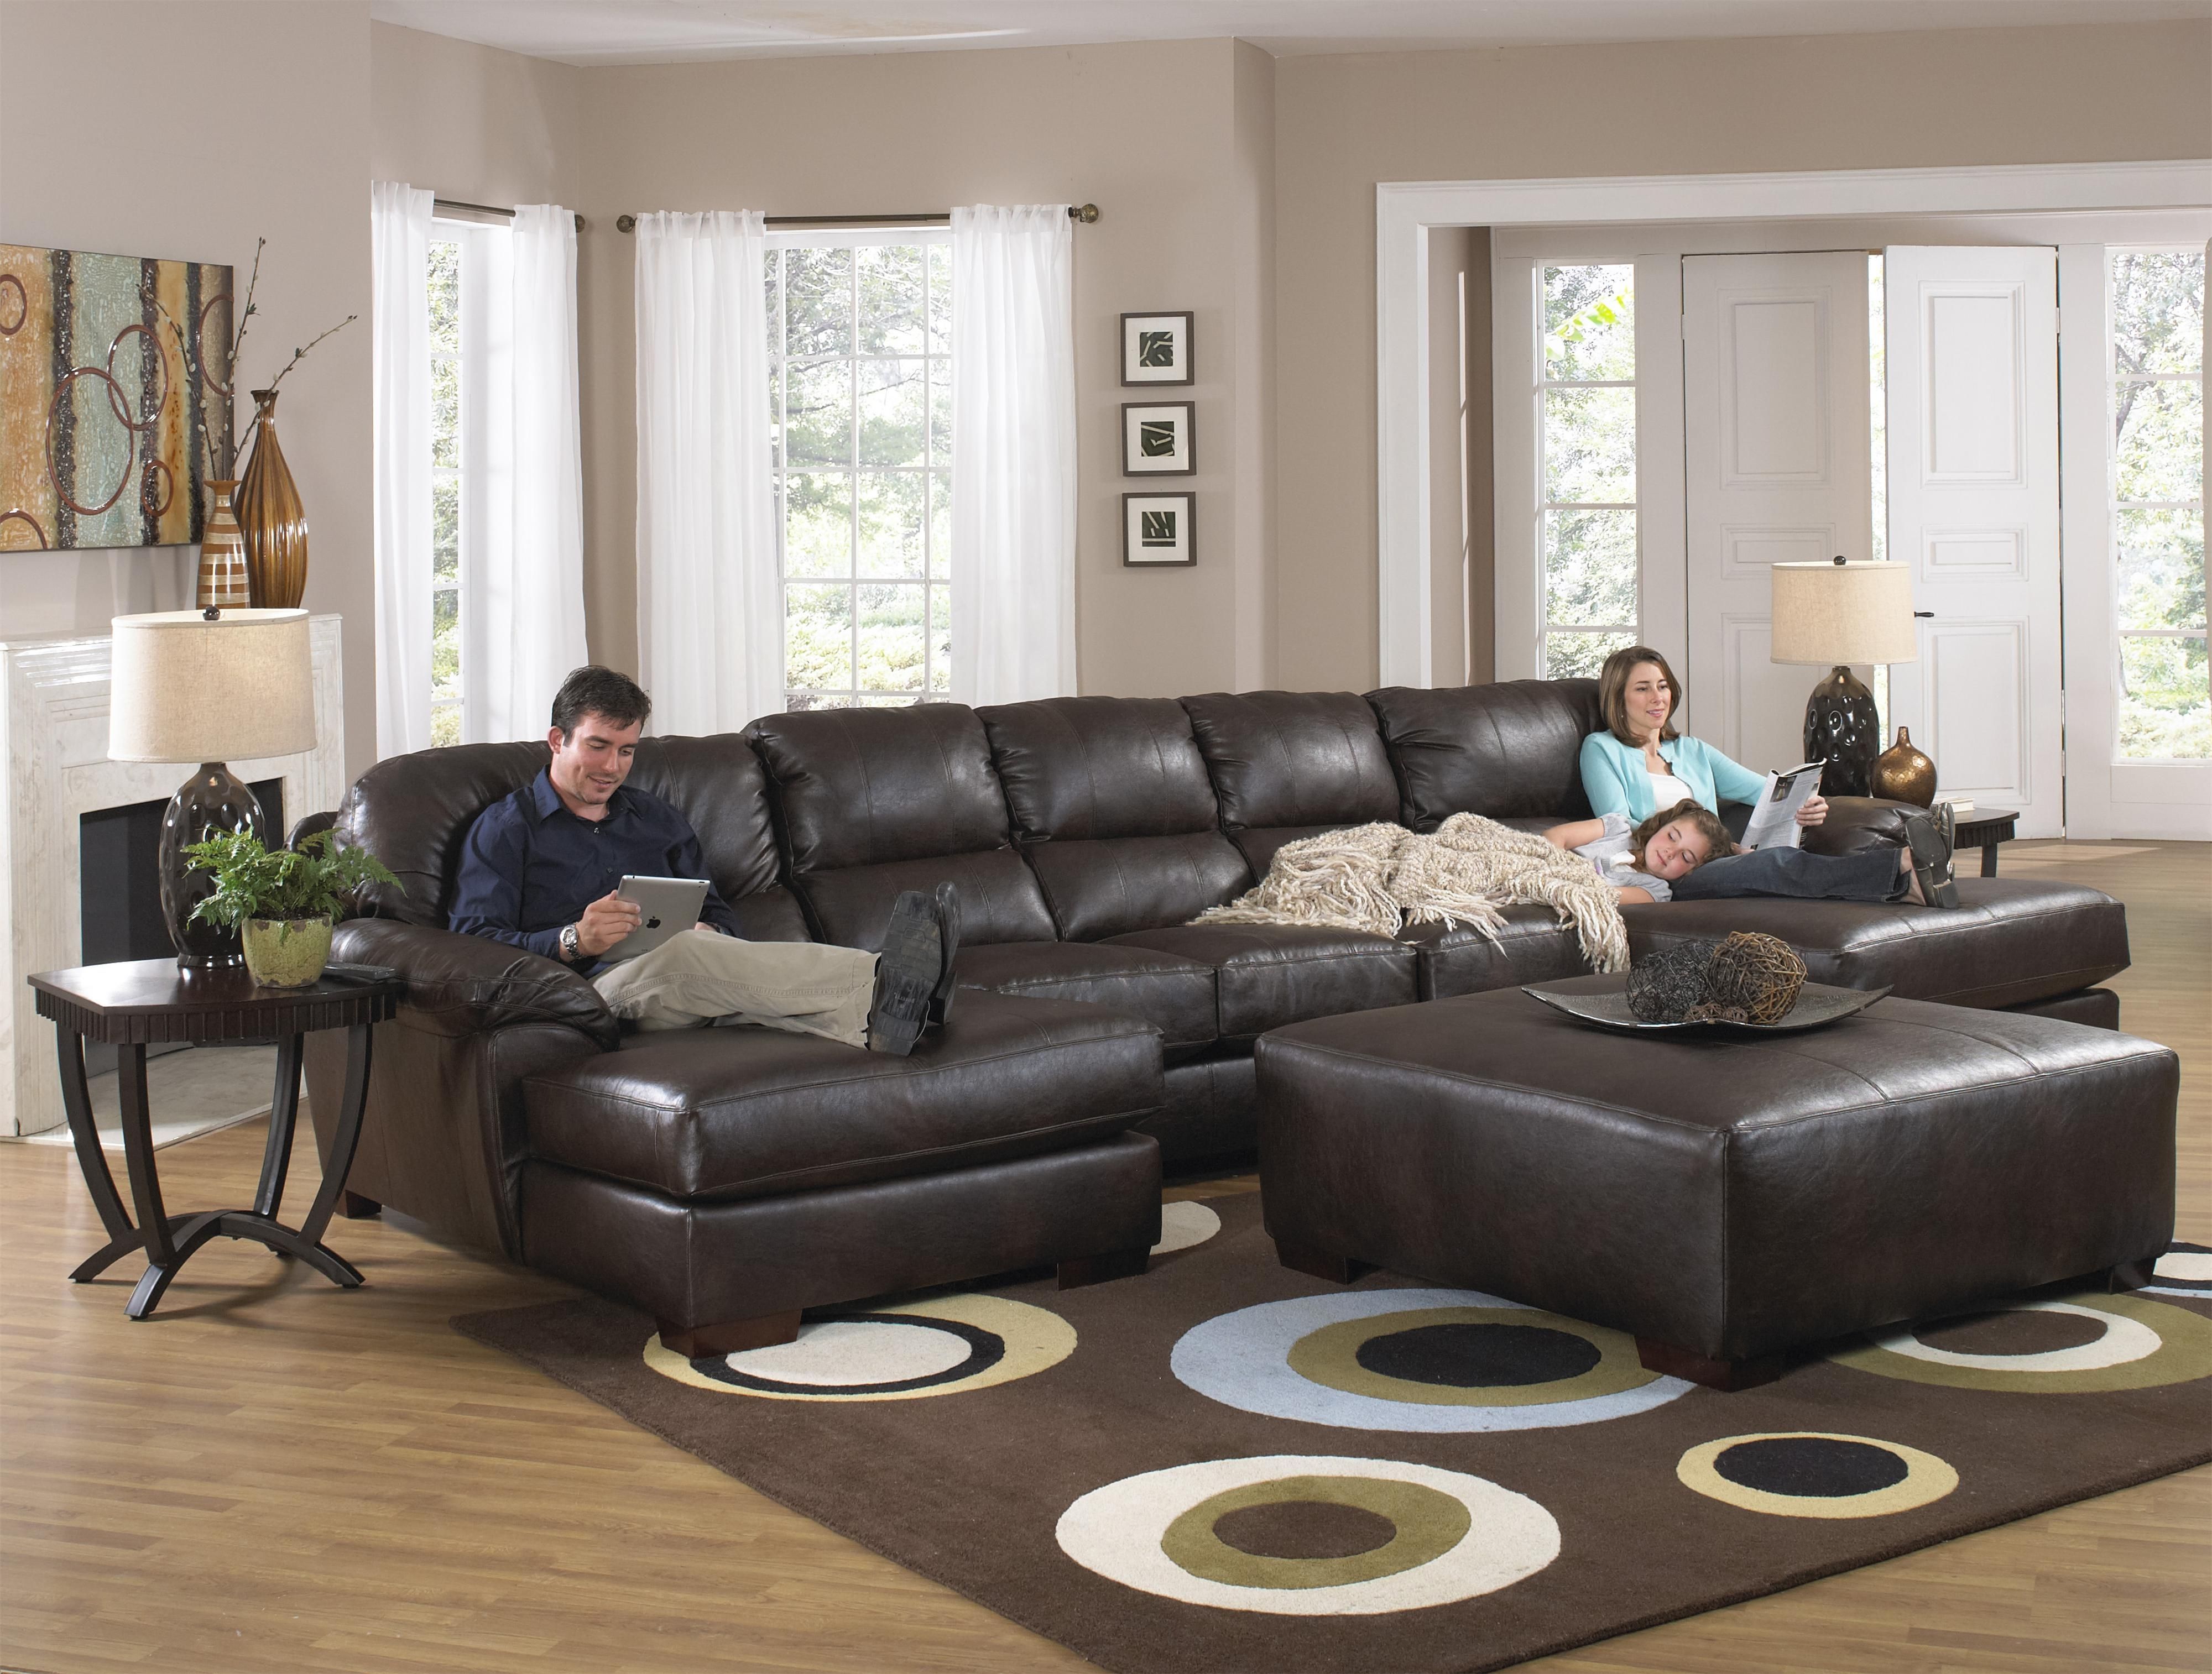 Sectionals With Chaise Lounge Intended For Famous Big Lots Recliners Ashley Furniture Sectional Sofas Cheap (View 9 of 15)